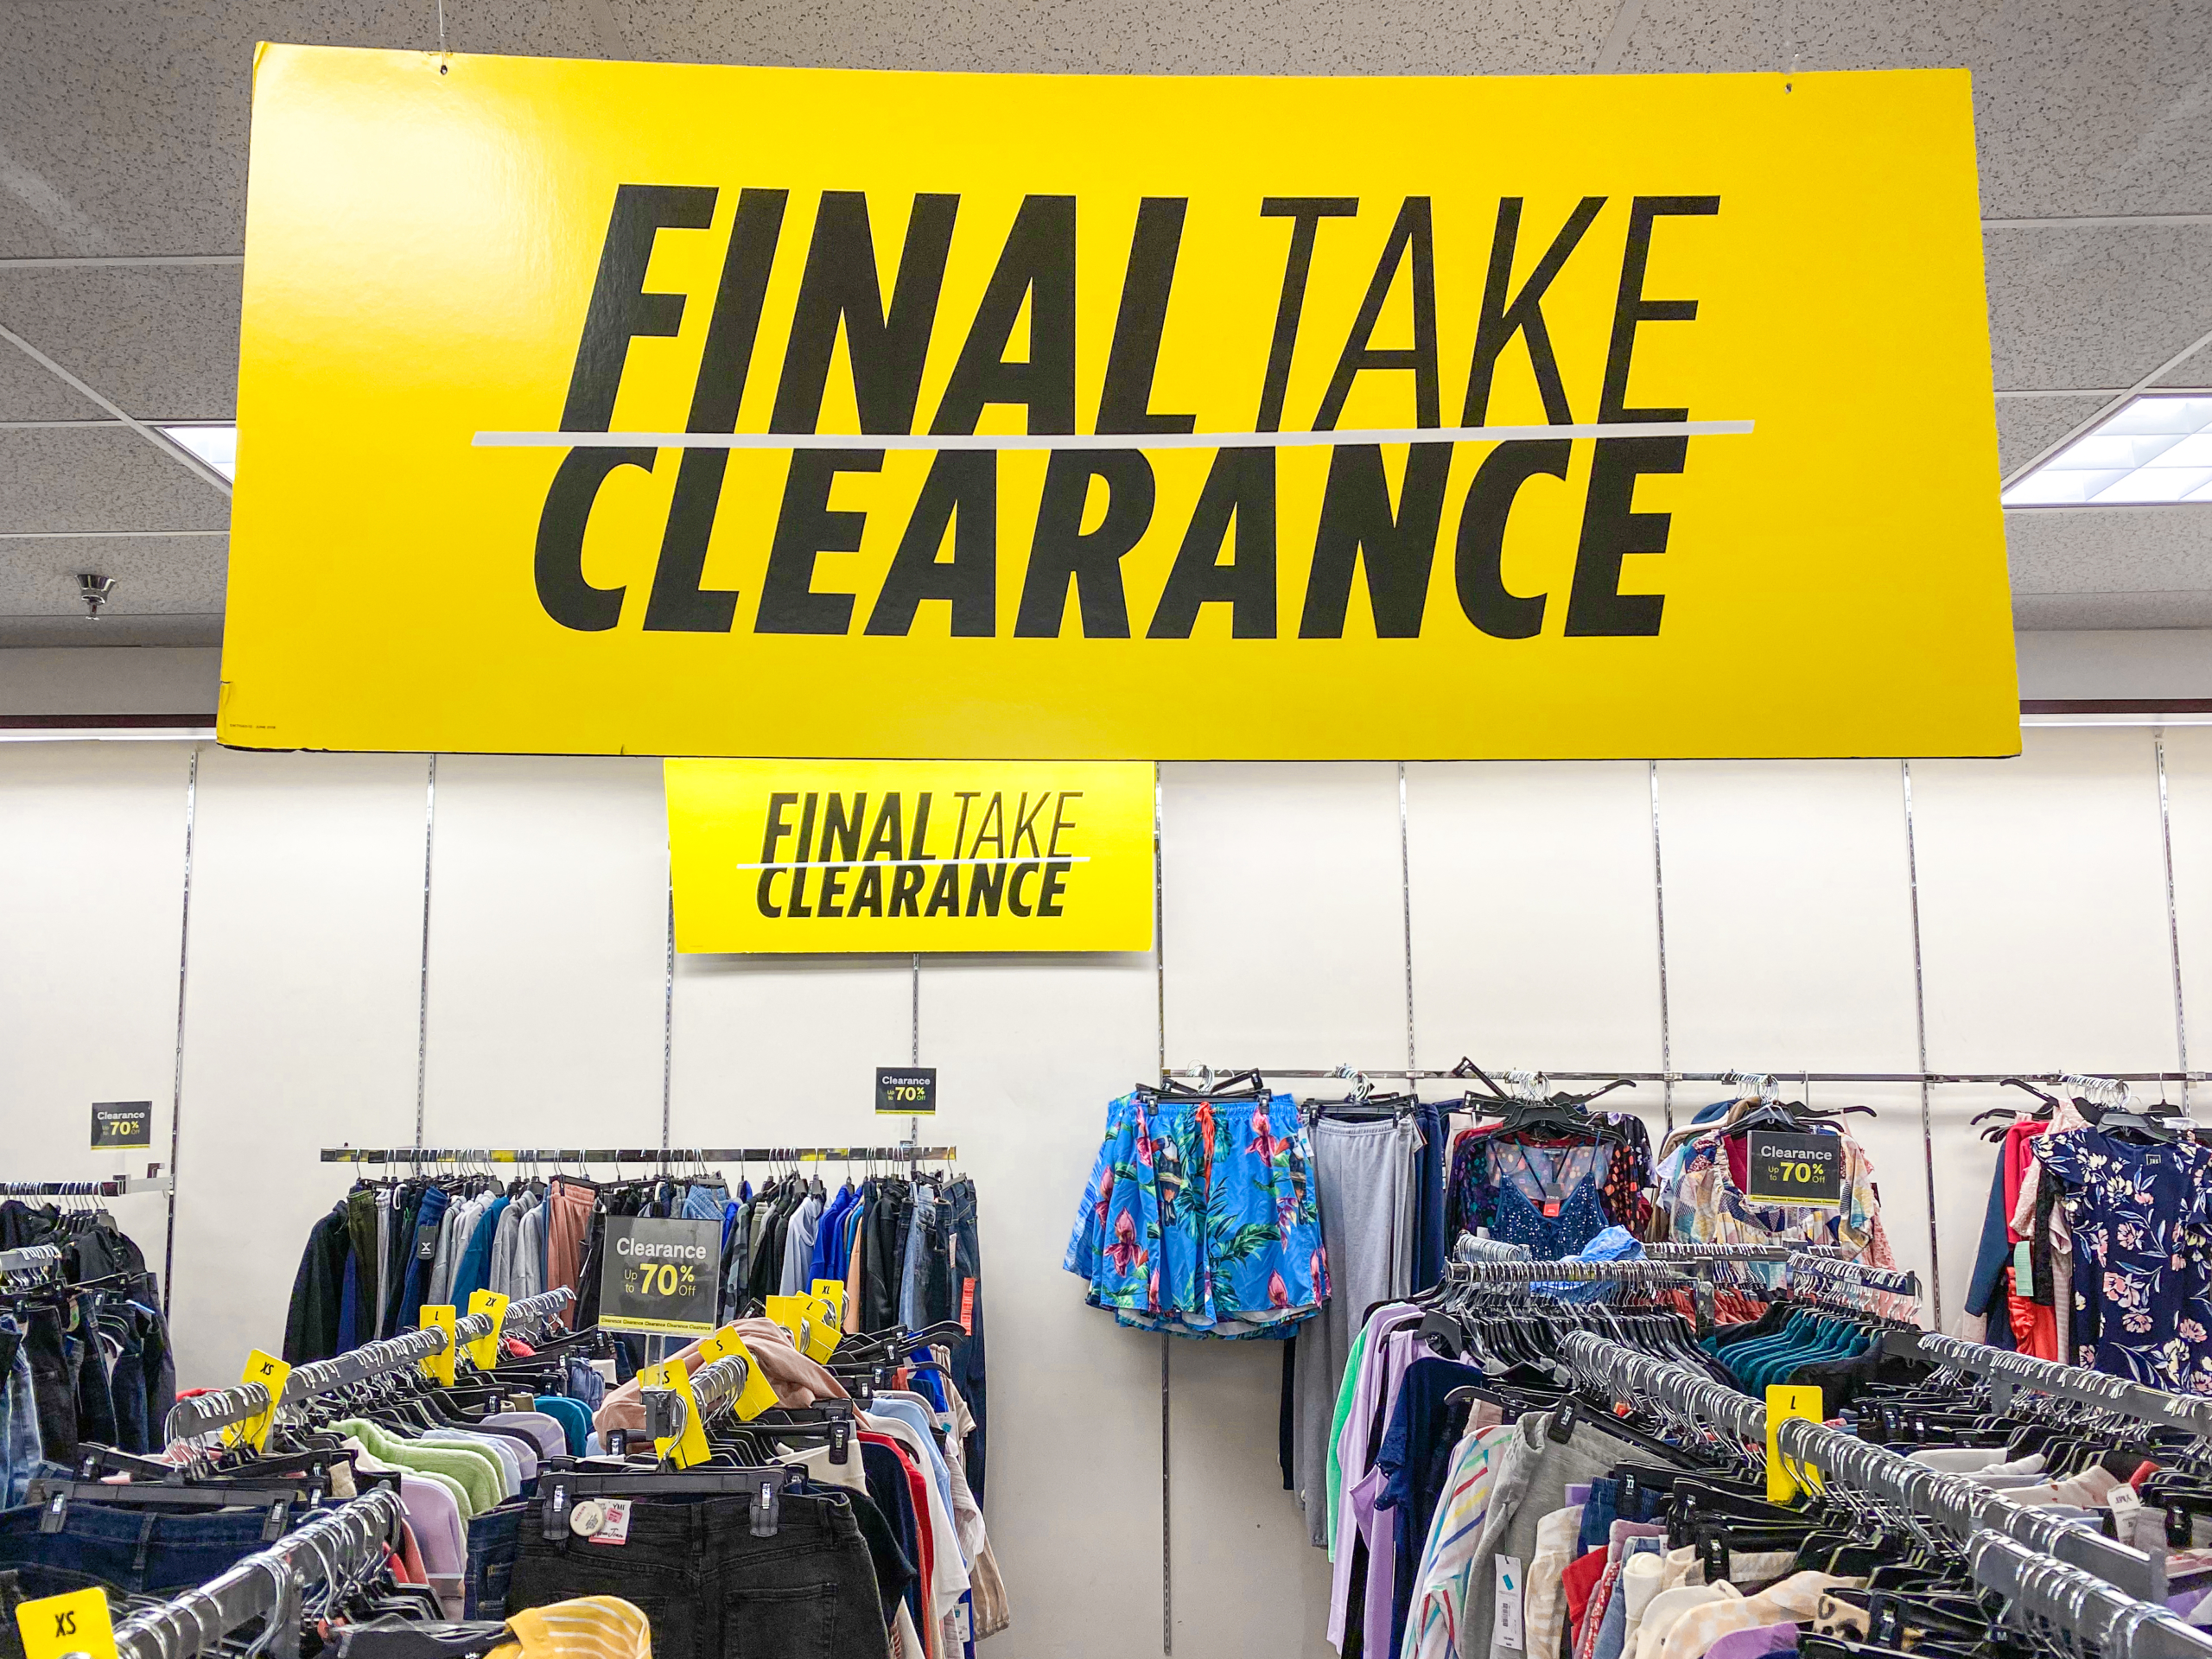 The Best Clearance Finds at JCPenney: $3 Fuzzy Socks, $7 Throw